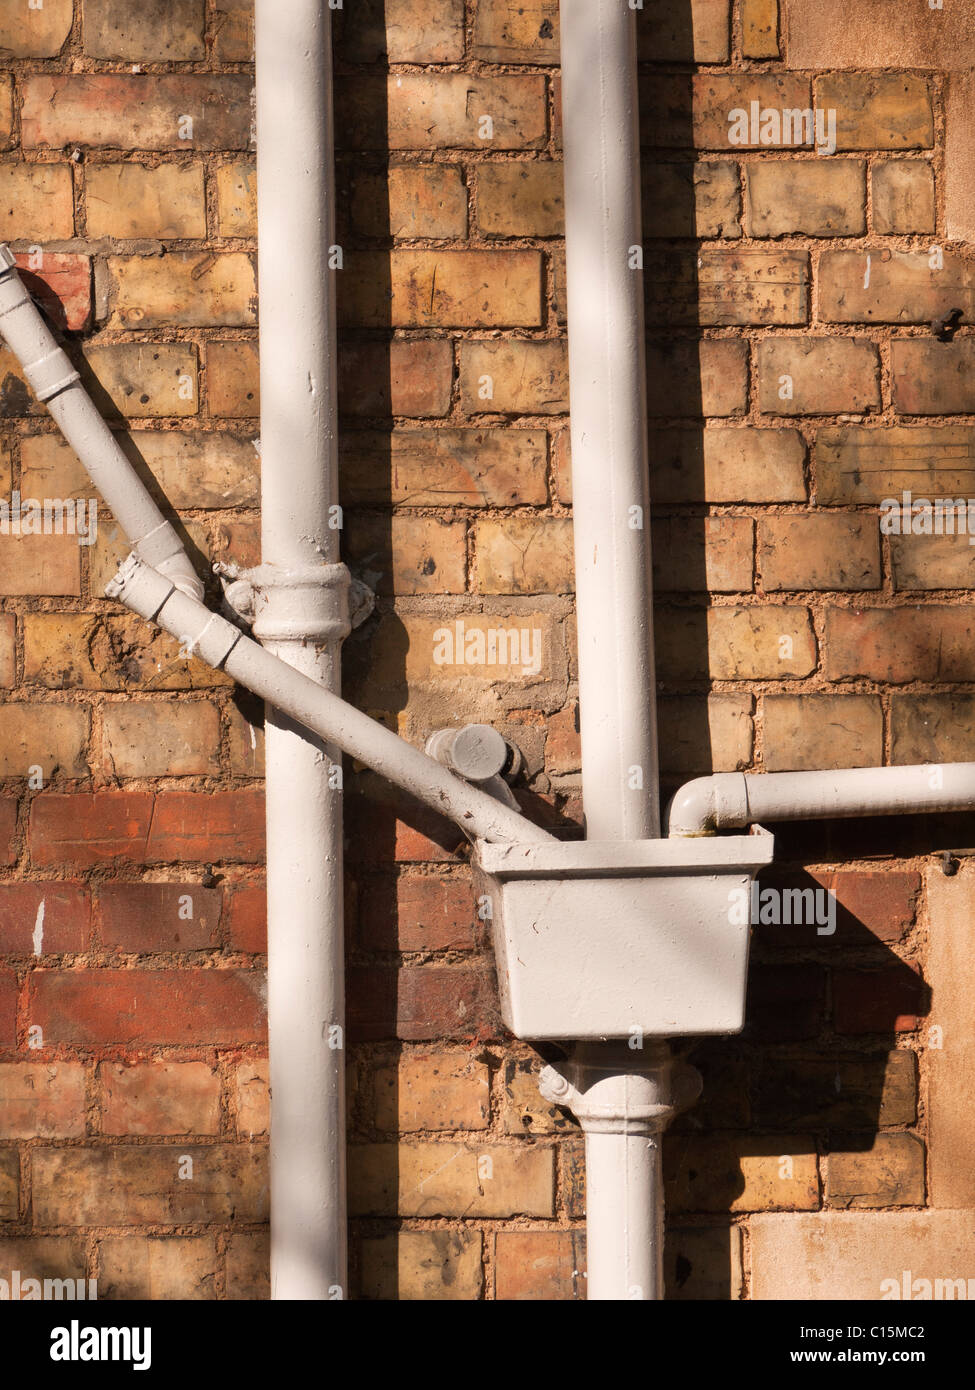 Drain pipes on 19th century brick building Stock Photo